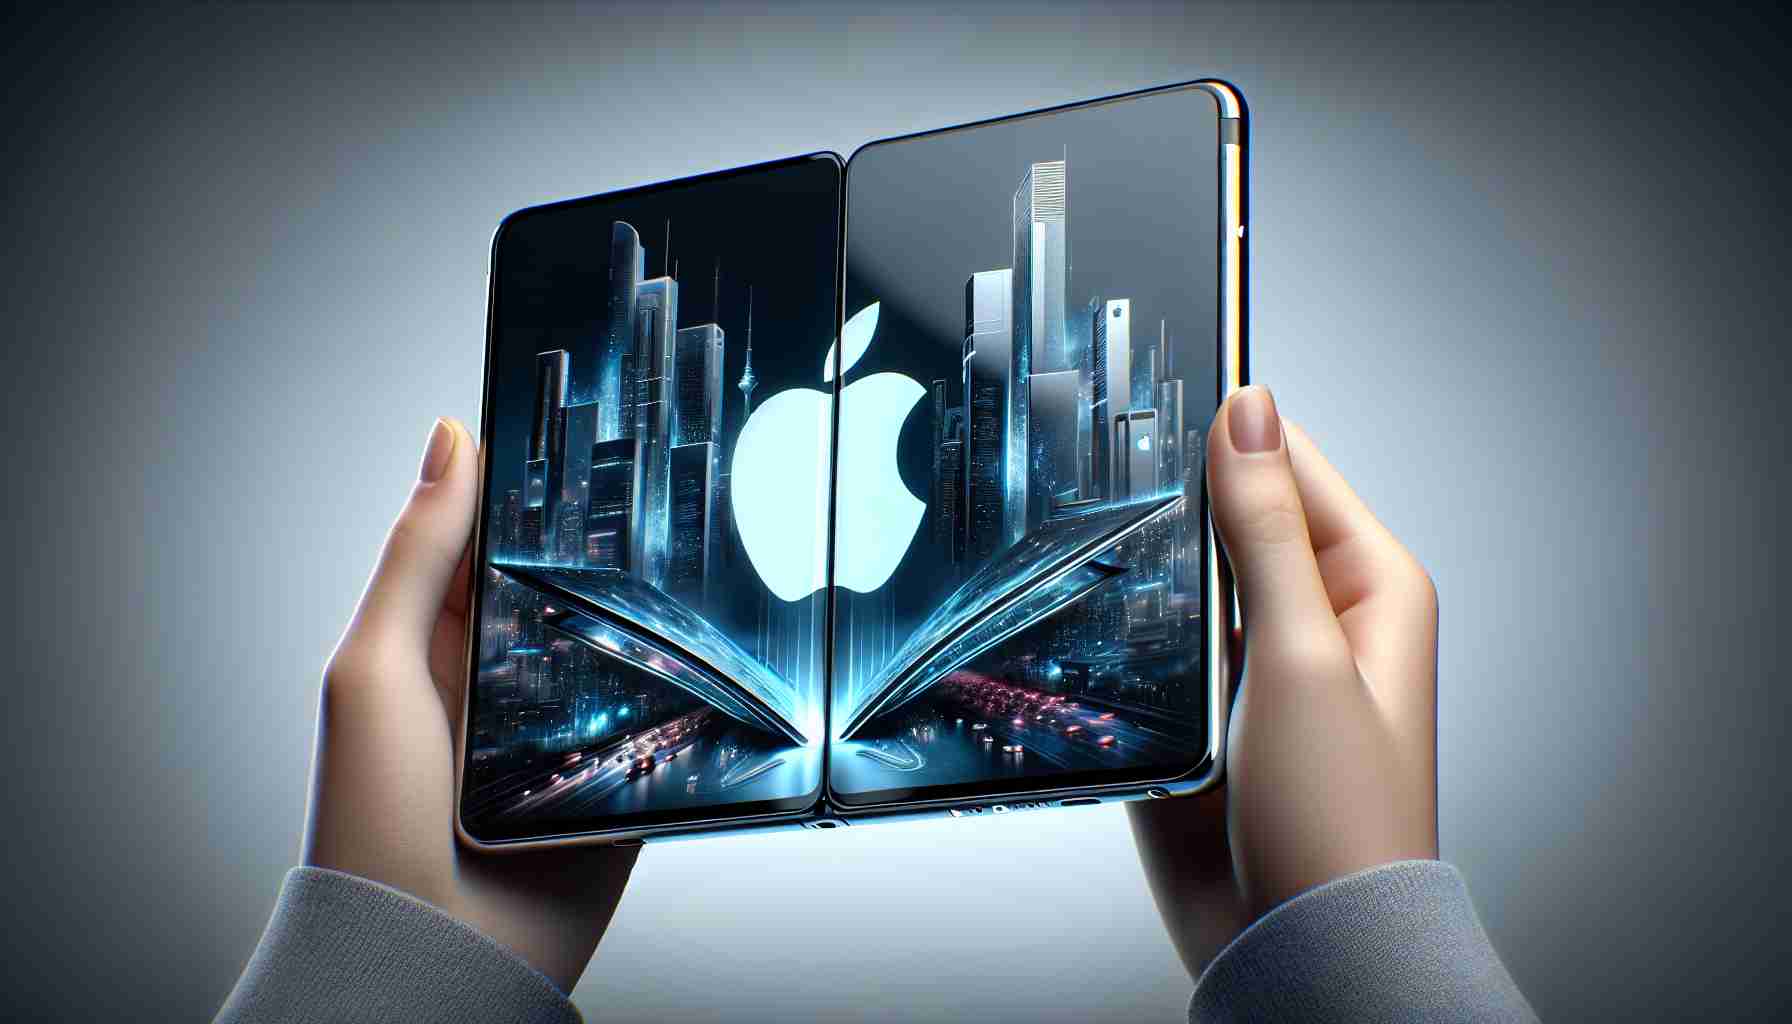 Apple Reportedly Exploring Foldable Devices for 2026 Release